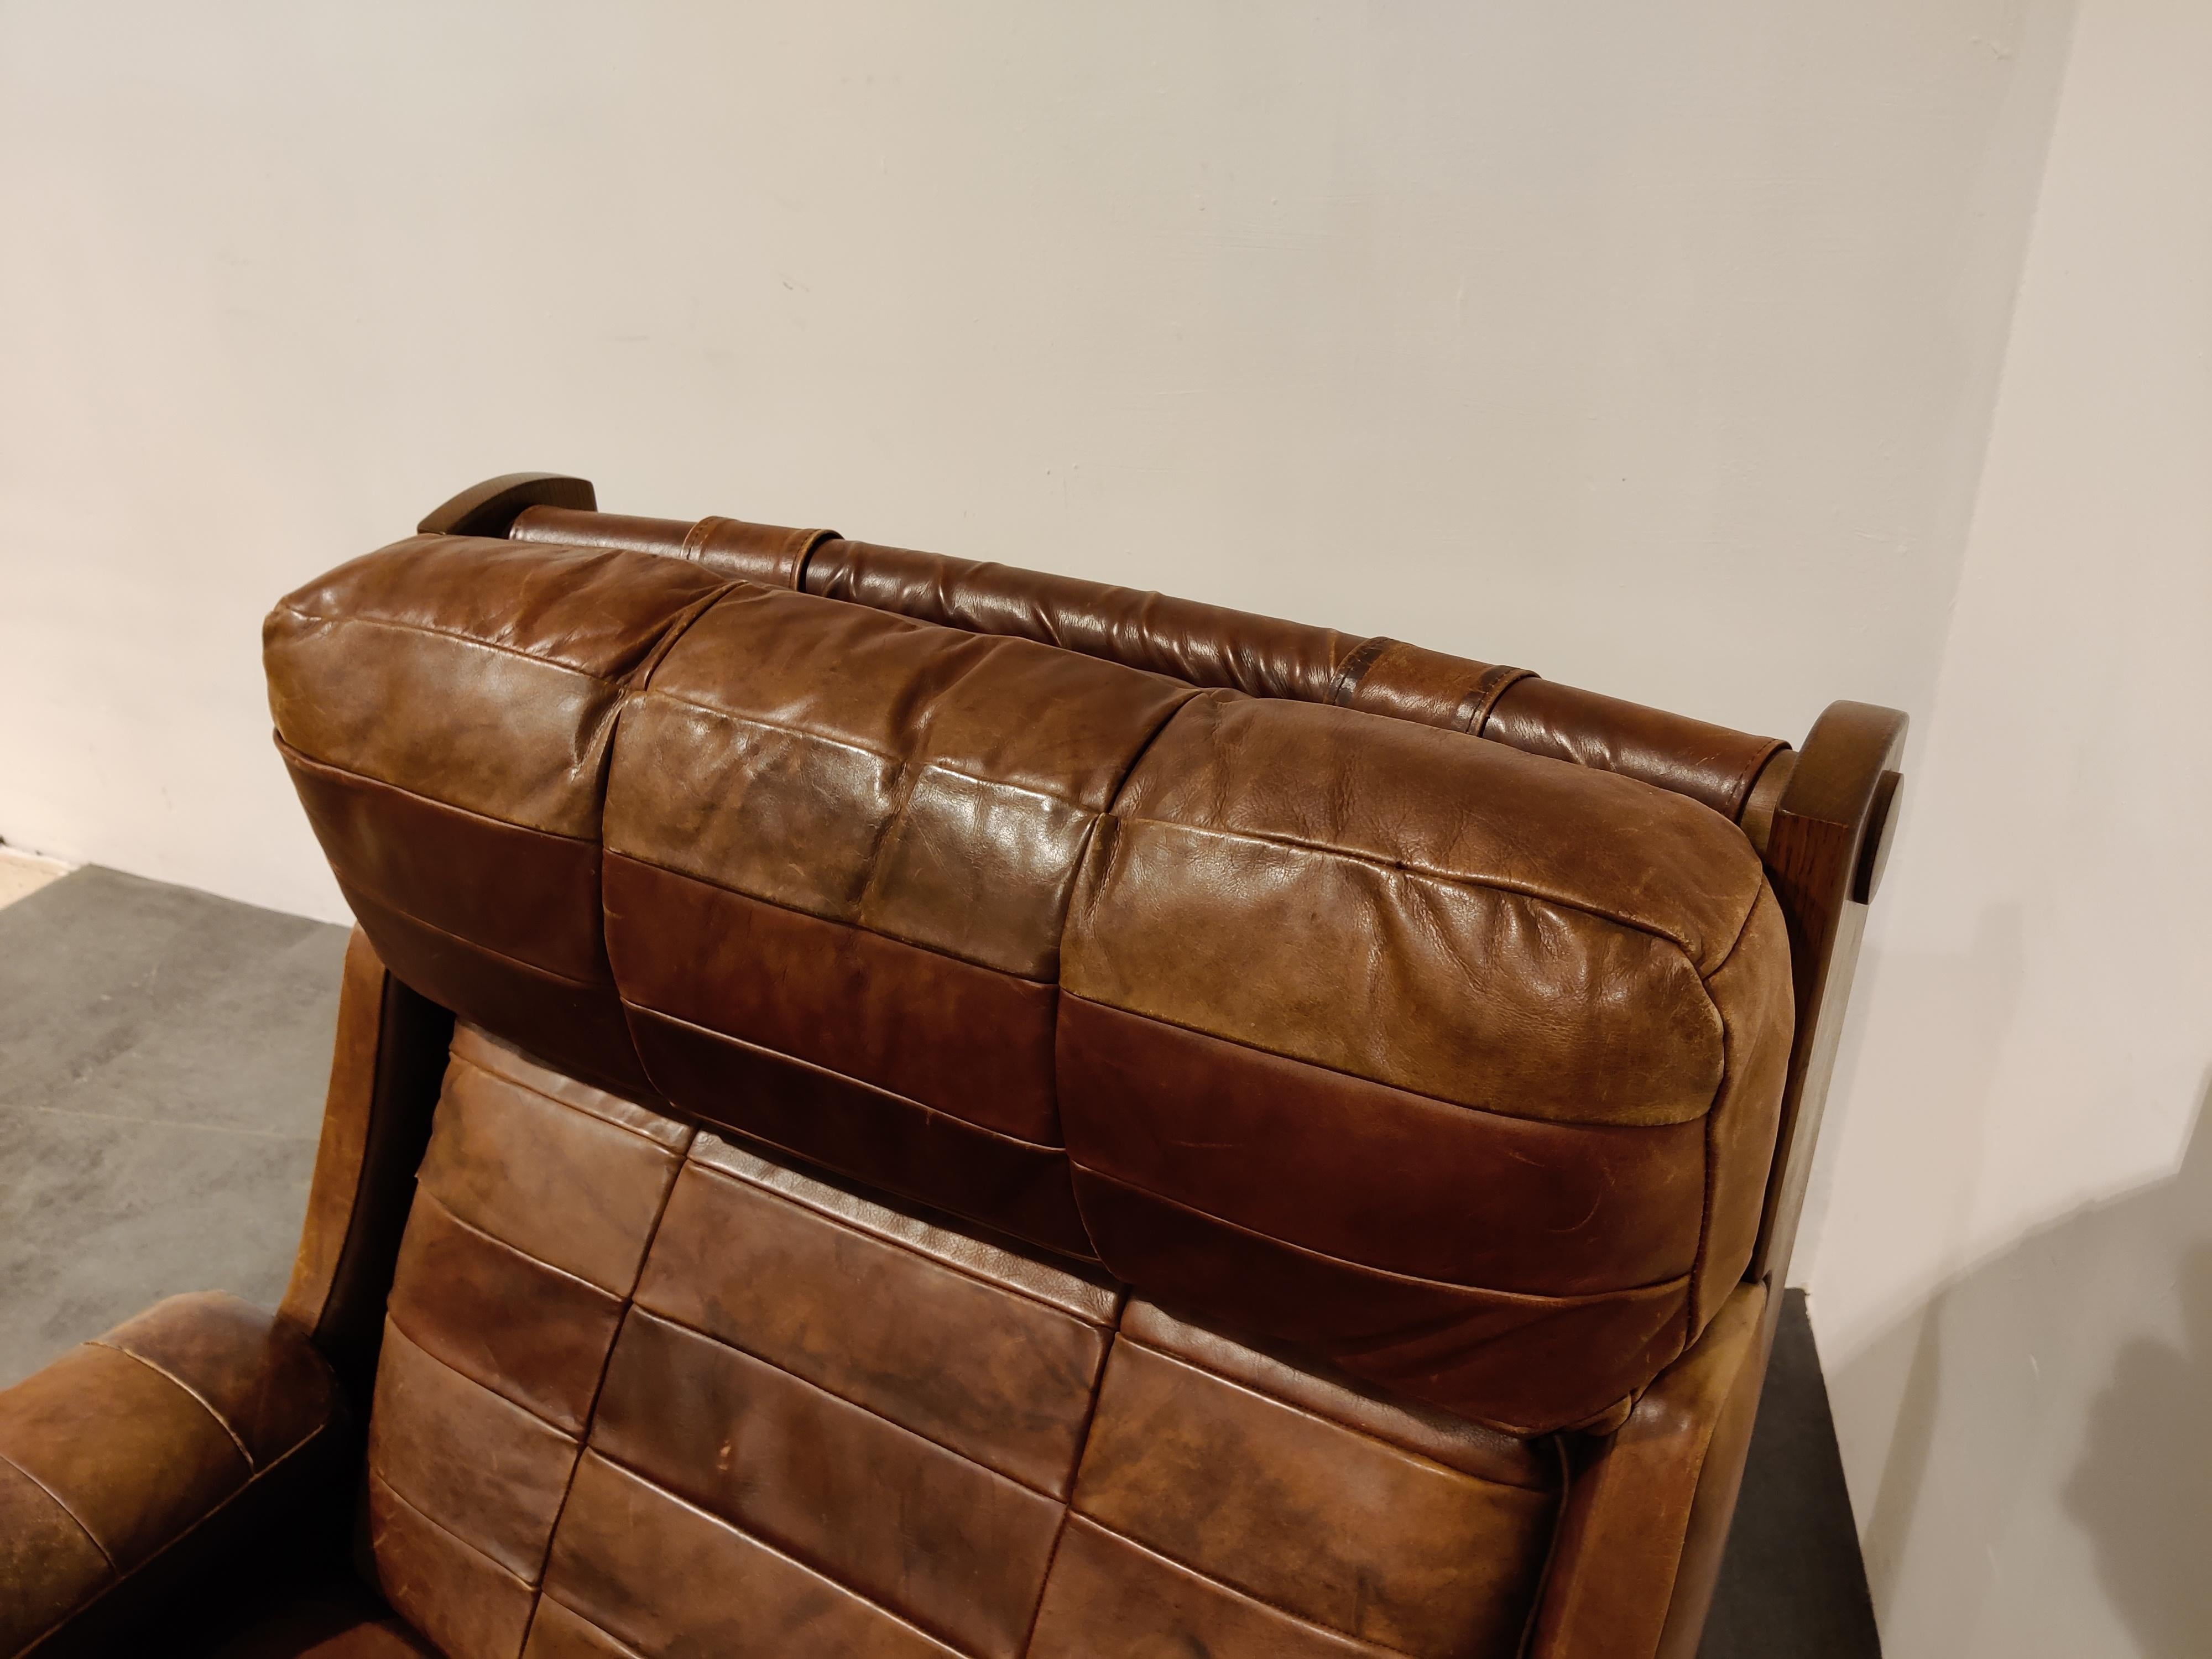 Mid century armchair with a oak wooden frame and beautiful brown patchwork leather upholstery. 

Fantastic vintage look.

Original condition with normal age related wear. 

1960s - Germany

Dimensions
Height: 86cm/33.85